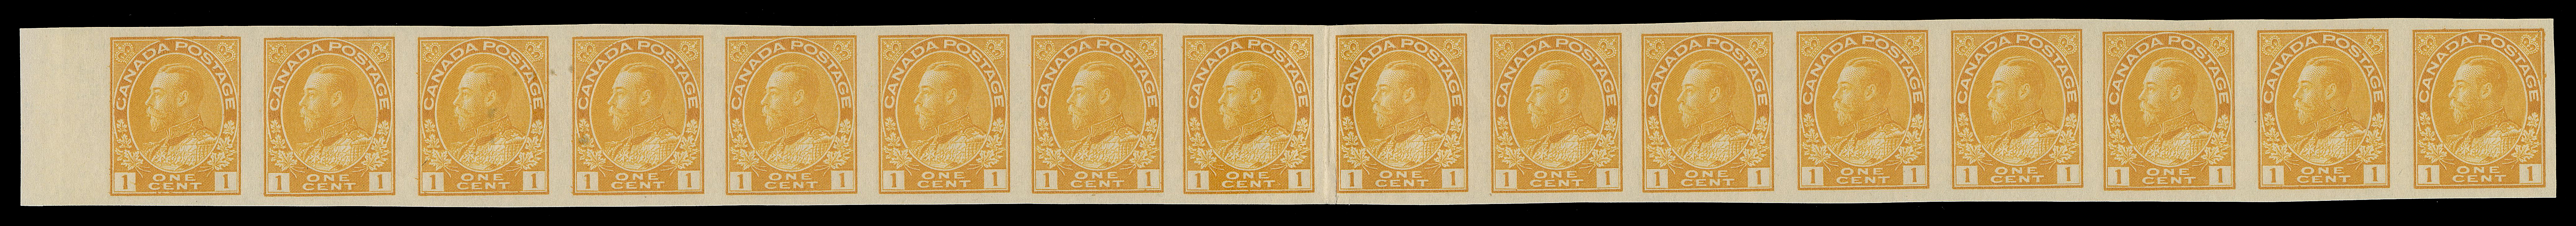 ADMIRAL STAMPS  136, 137,Two spectacular unsevered interpanneau strips of sixteen stamps each, straddling stamps from both the left and right panes, 1c folded vertically between eighth and ninth stamps, hinged on  four, couple stamps with tiny stain spots; 2c strip folded  vertically between fourth and fifth stamps, hinged on three. Very rare interpanneau multiples - the sheets of 400 were guillotined into panes of 100. These strips are among the very  few that escaped the cutting blade, VF